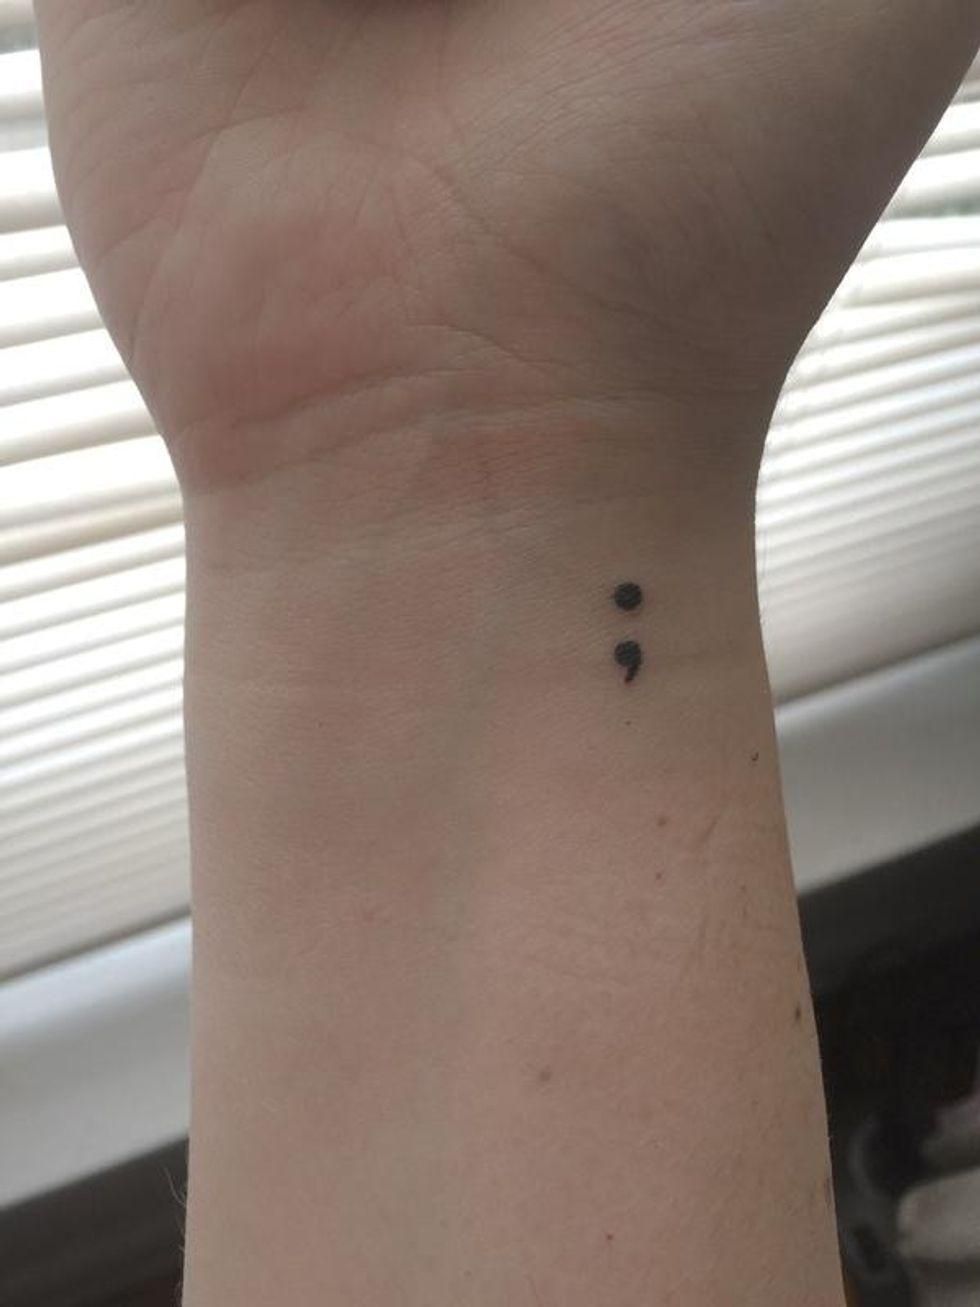 89 Semicolon Tattoo Ideas That Are Beautifully Done - TattooGlee | Semicolon  tattoo, Semicolon heart tattoo, Tattoo designs and meanings